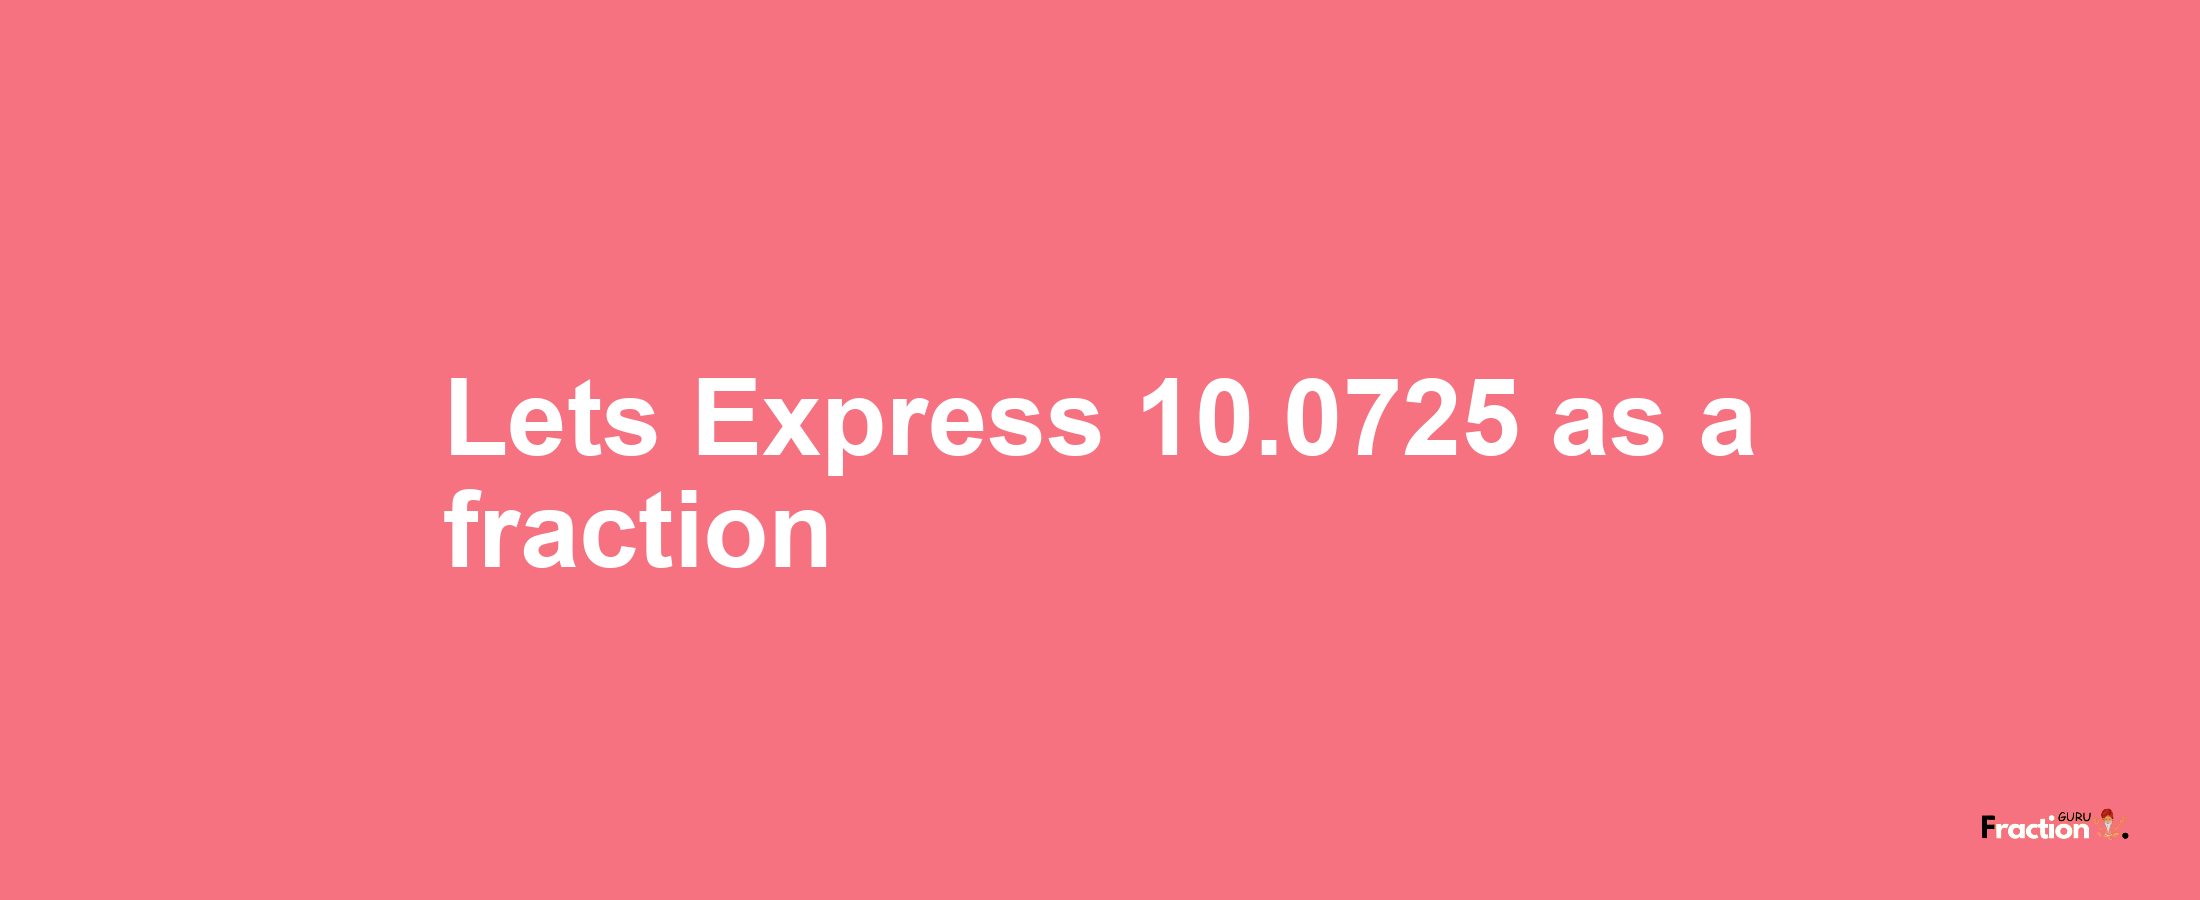 Lets Express 10.0725 as afraction